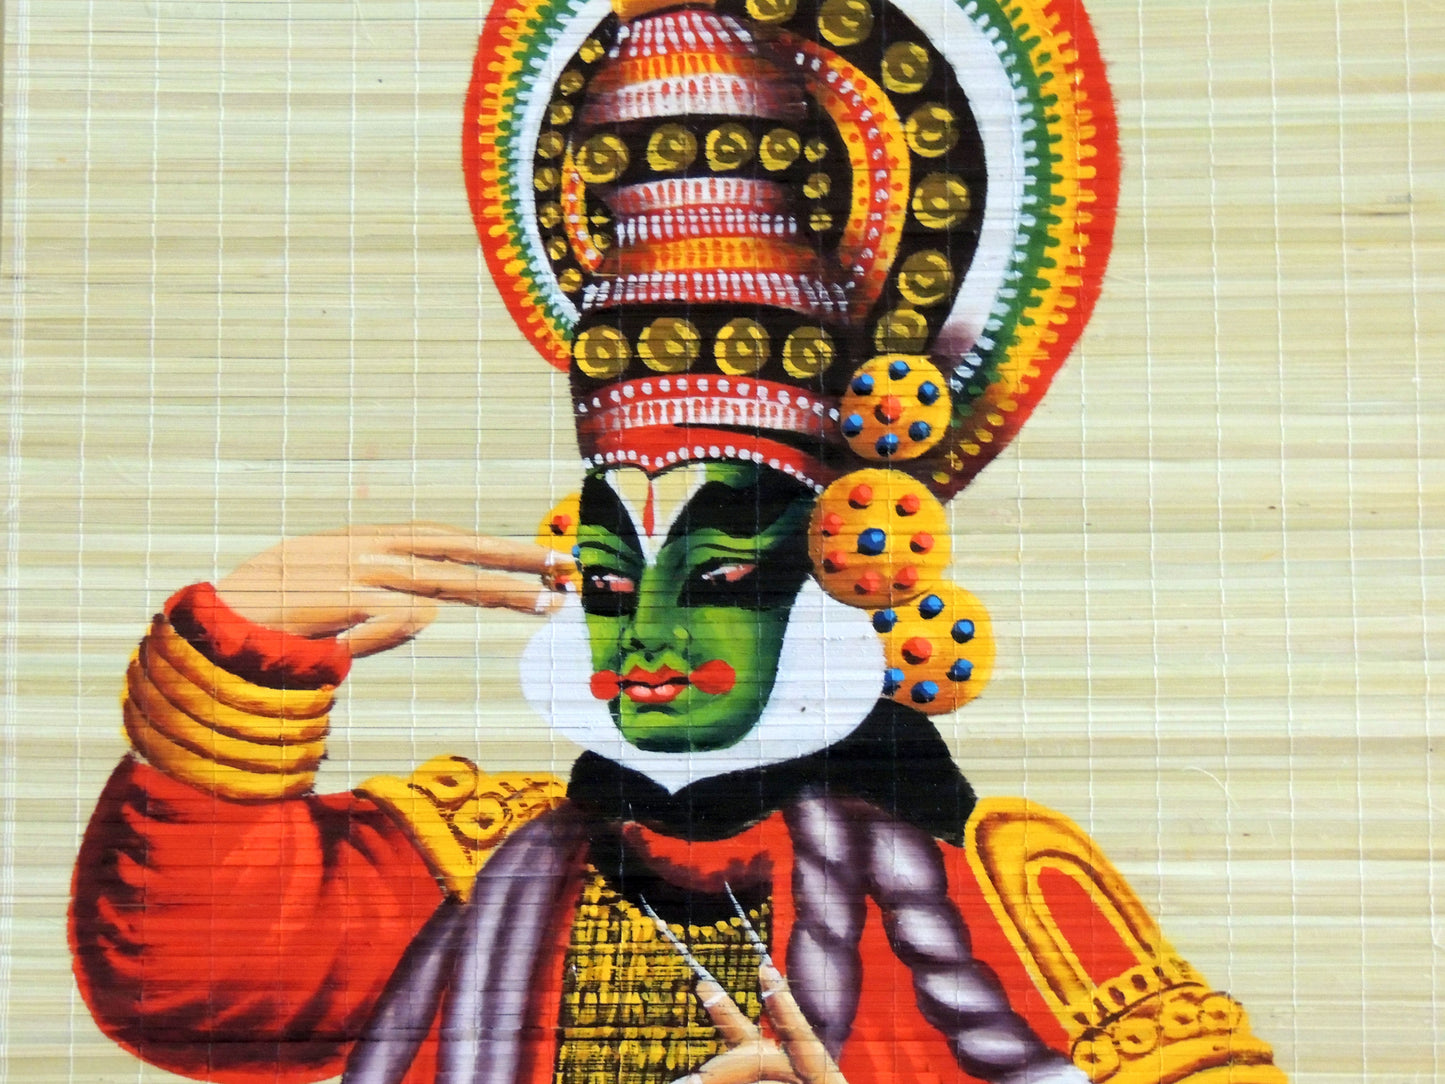 ZENRISE Kathakali Hand Painted Art on Woven Bamboo mat Wall Hanging Painting (Multicolour, 22x45 inches)